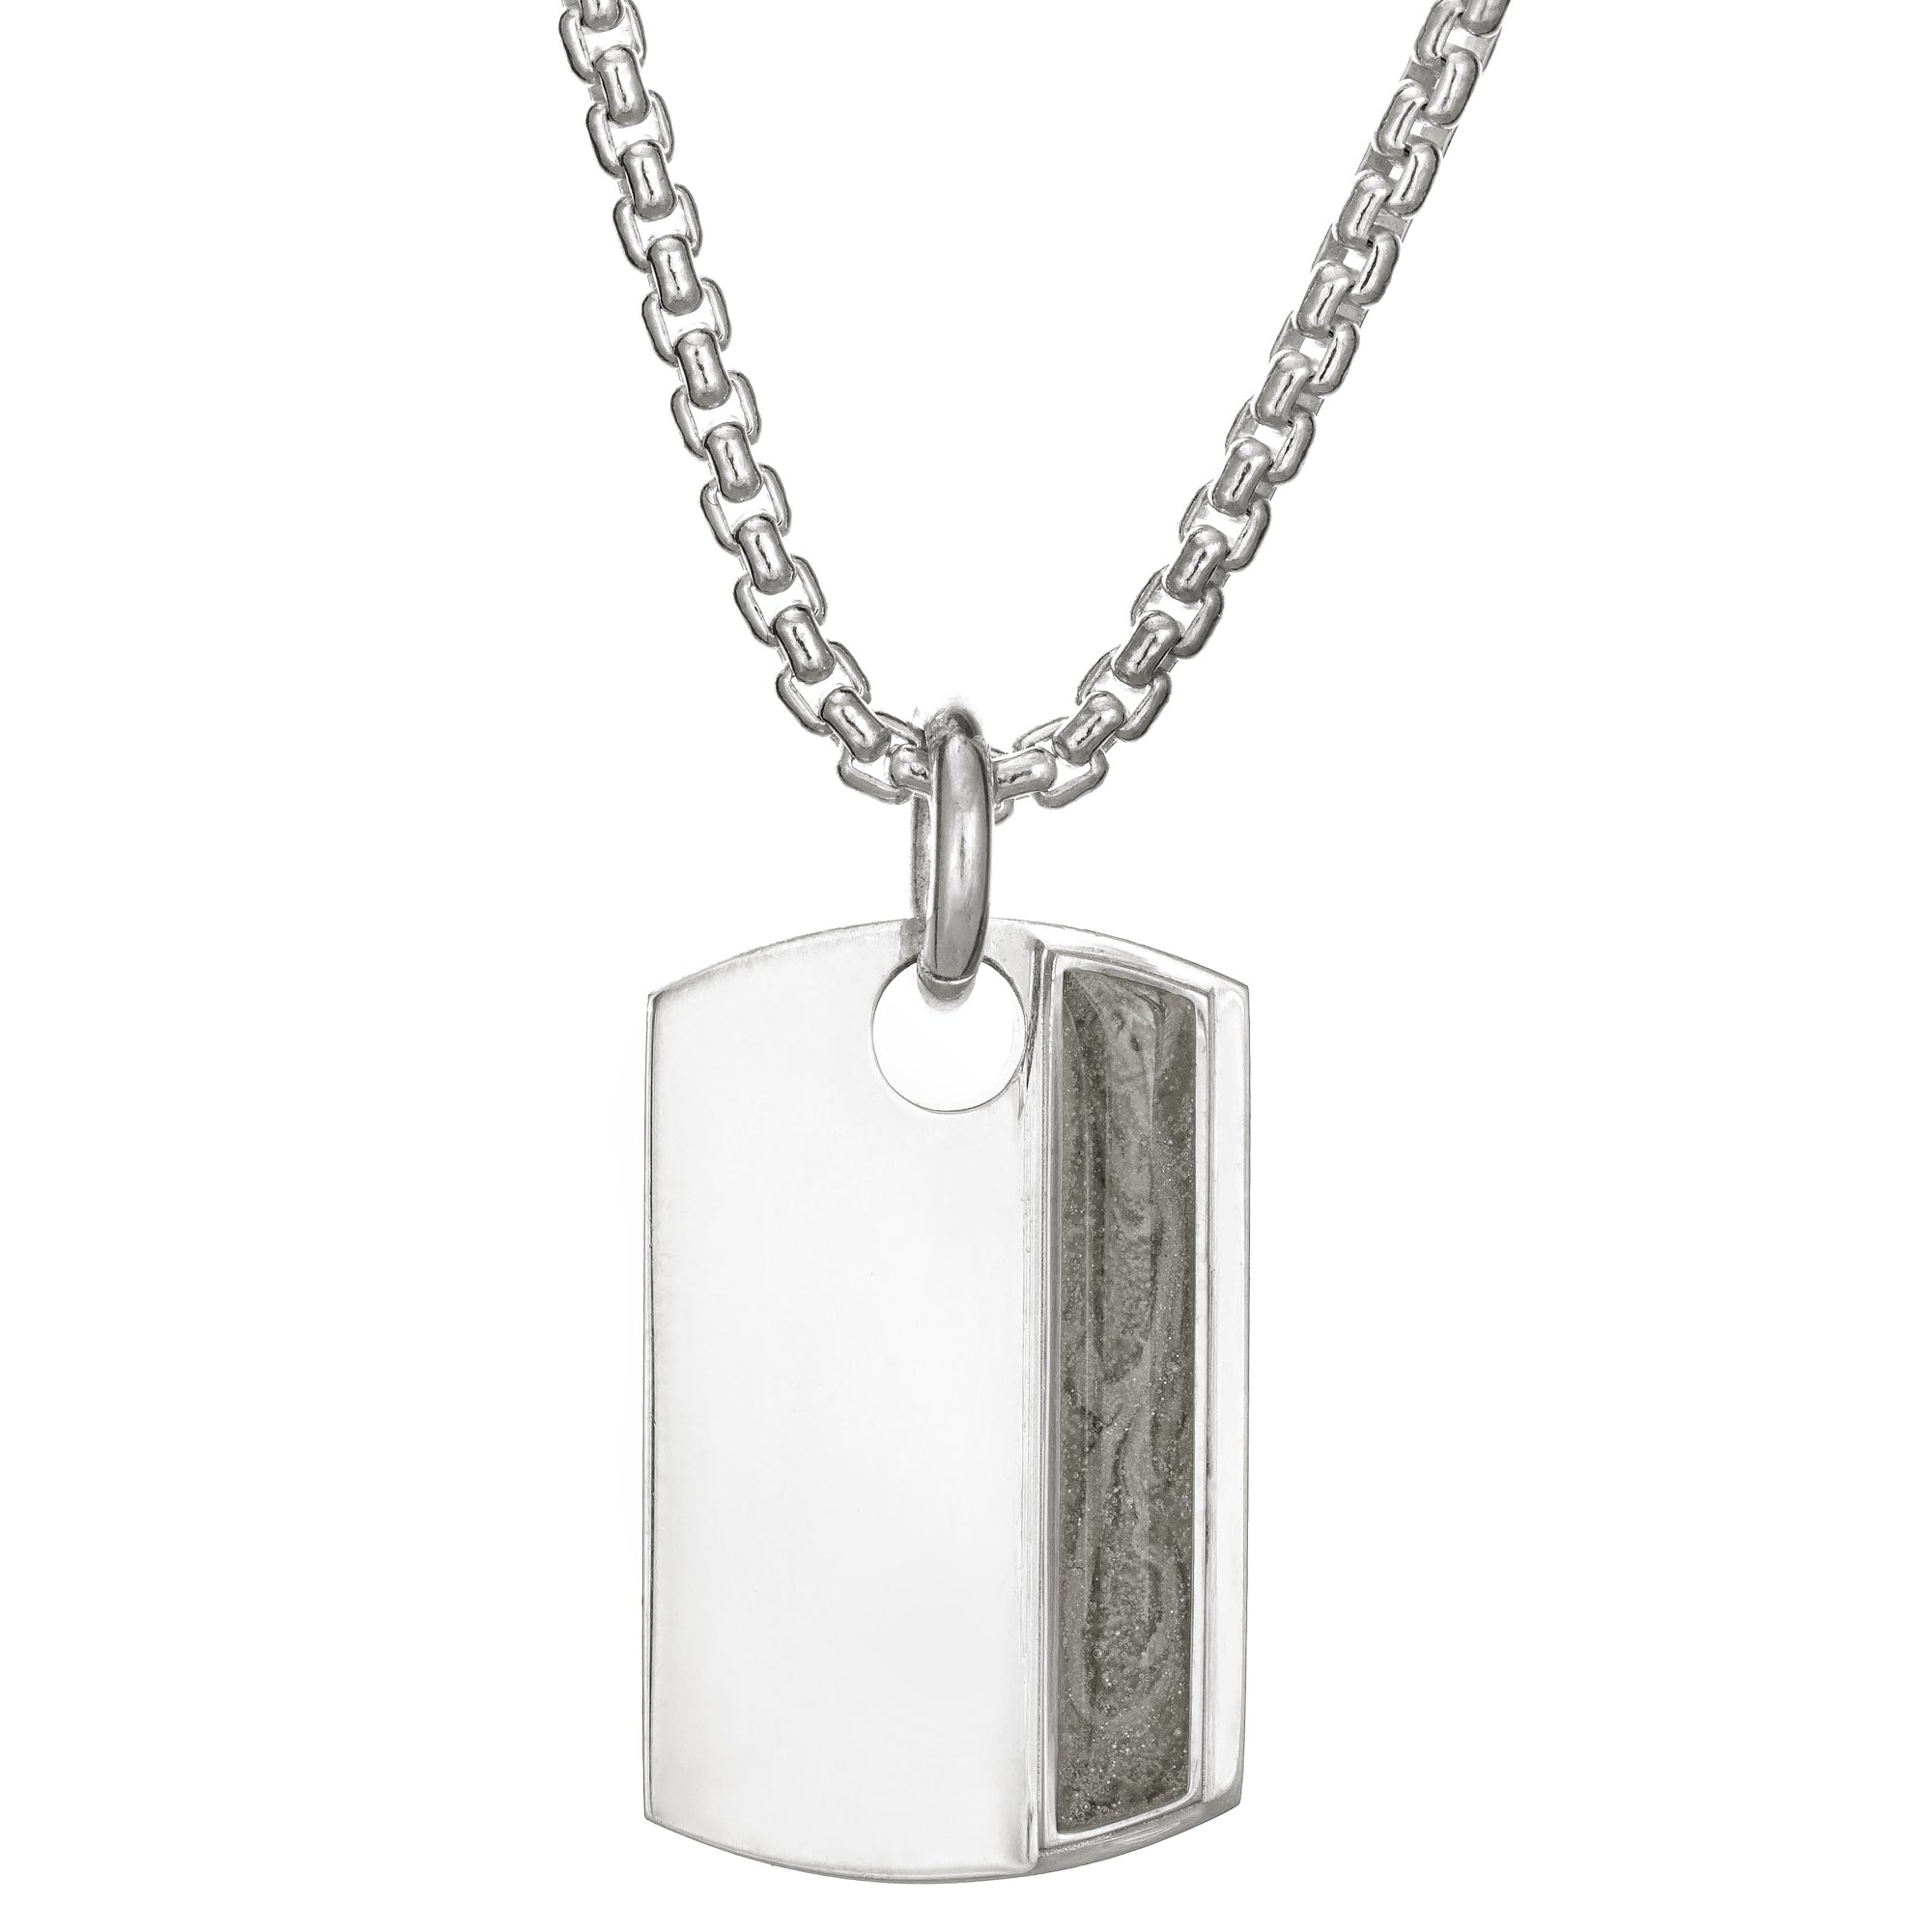 Mens Luxury Sterling Silver Tag Necklace | Posh Totty Designs | Wolf &  Badger